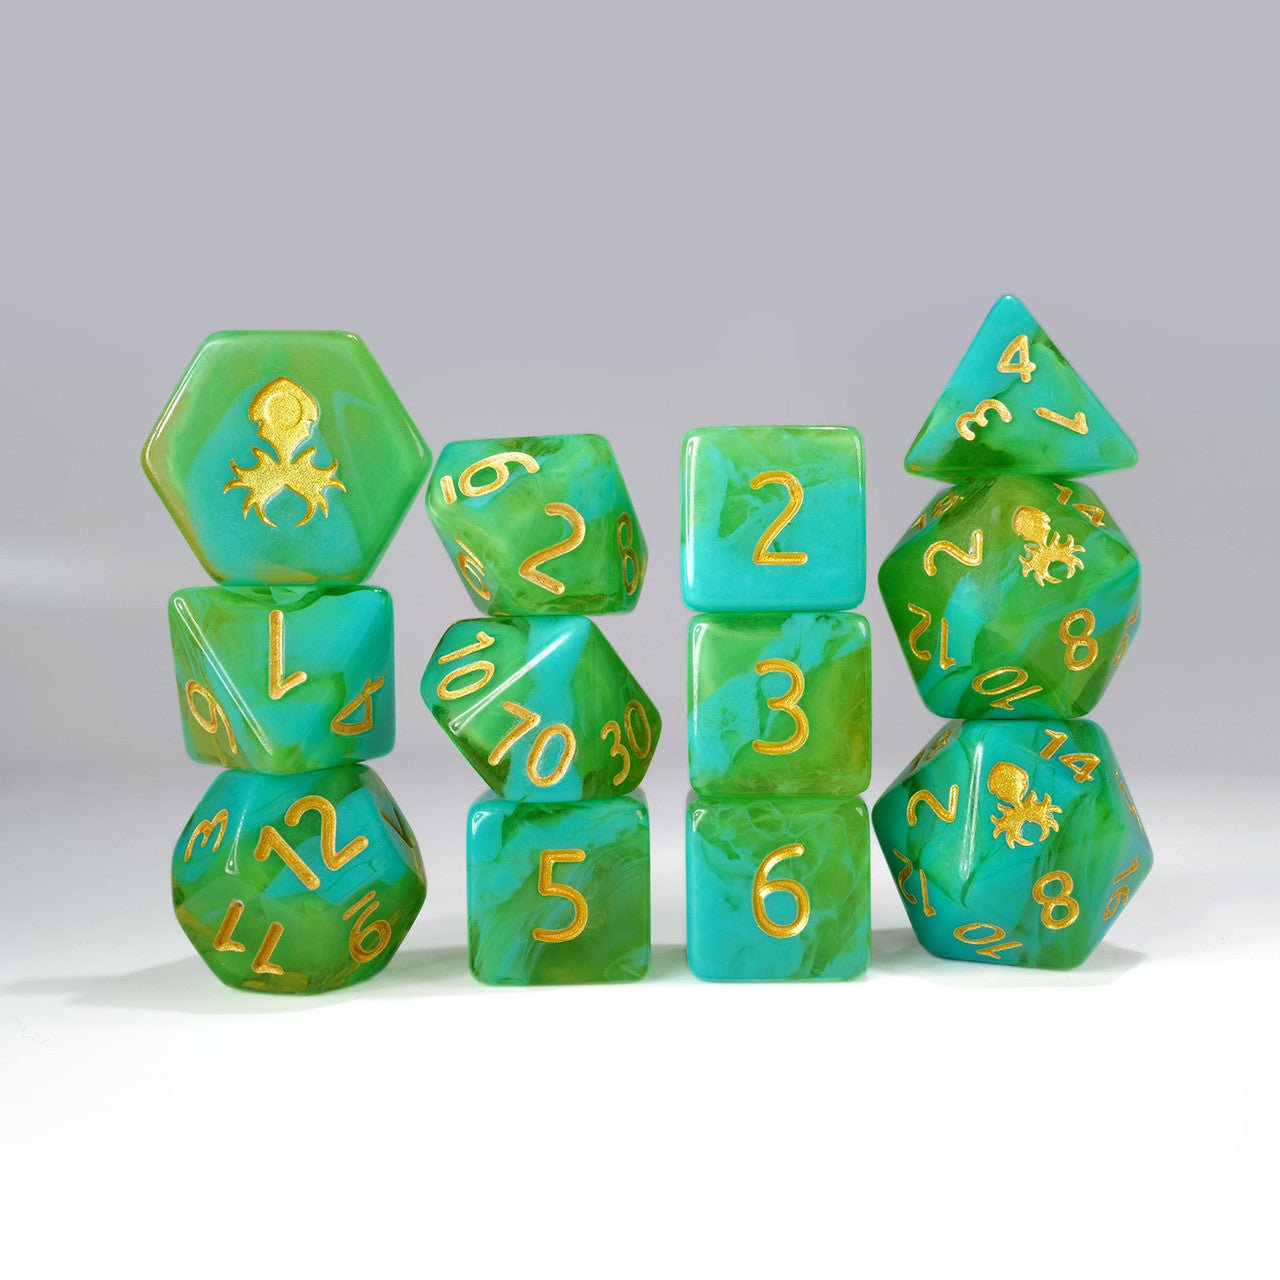 12pc Green and Light Blue Gummi Polyhedral Dice Set